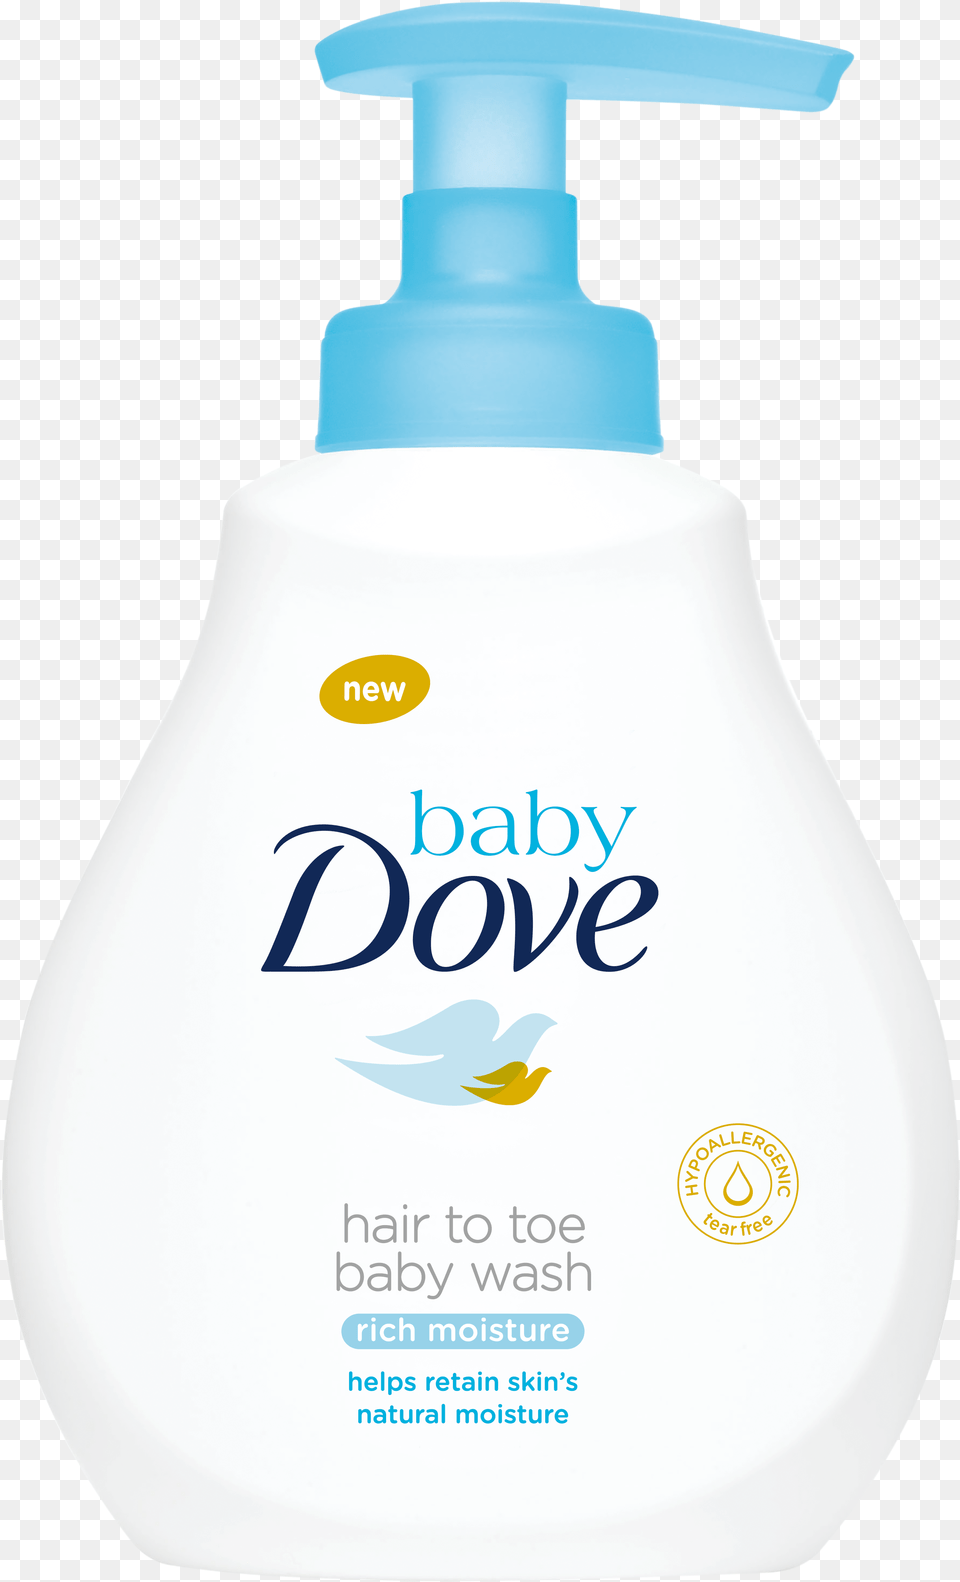 Baby Dove Tip To Toe Wash, Bottle, Lotion, Cosmetics, Shaker Png